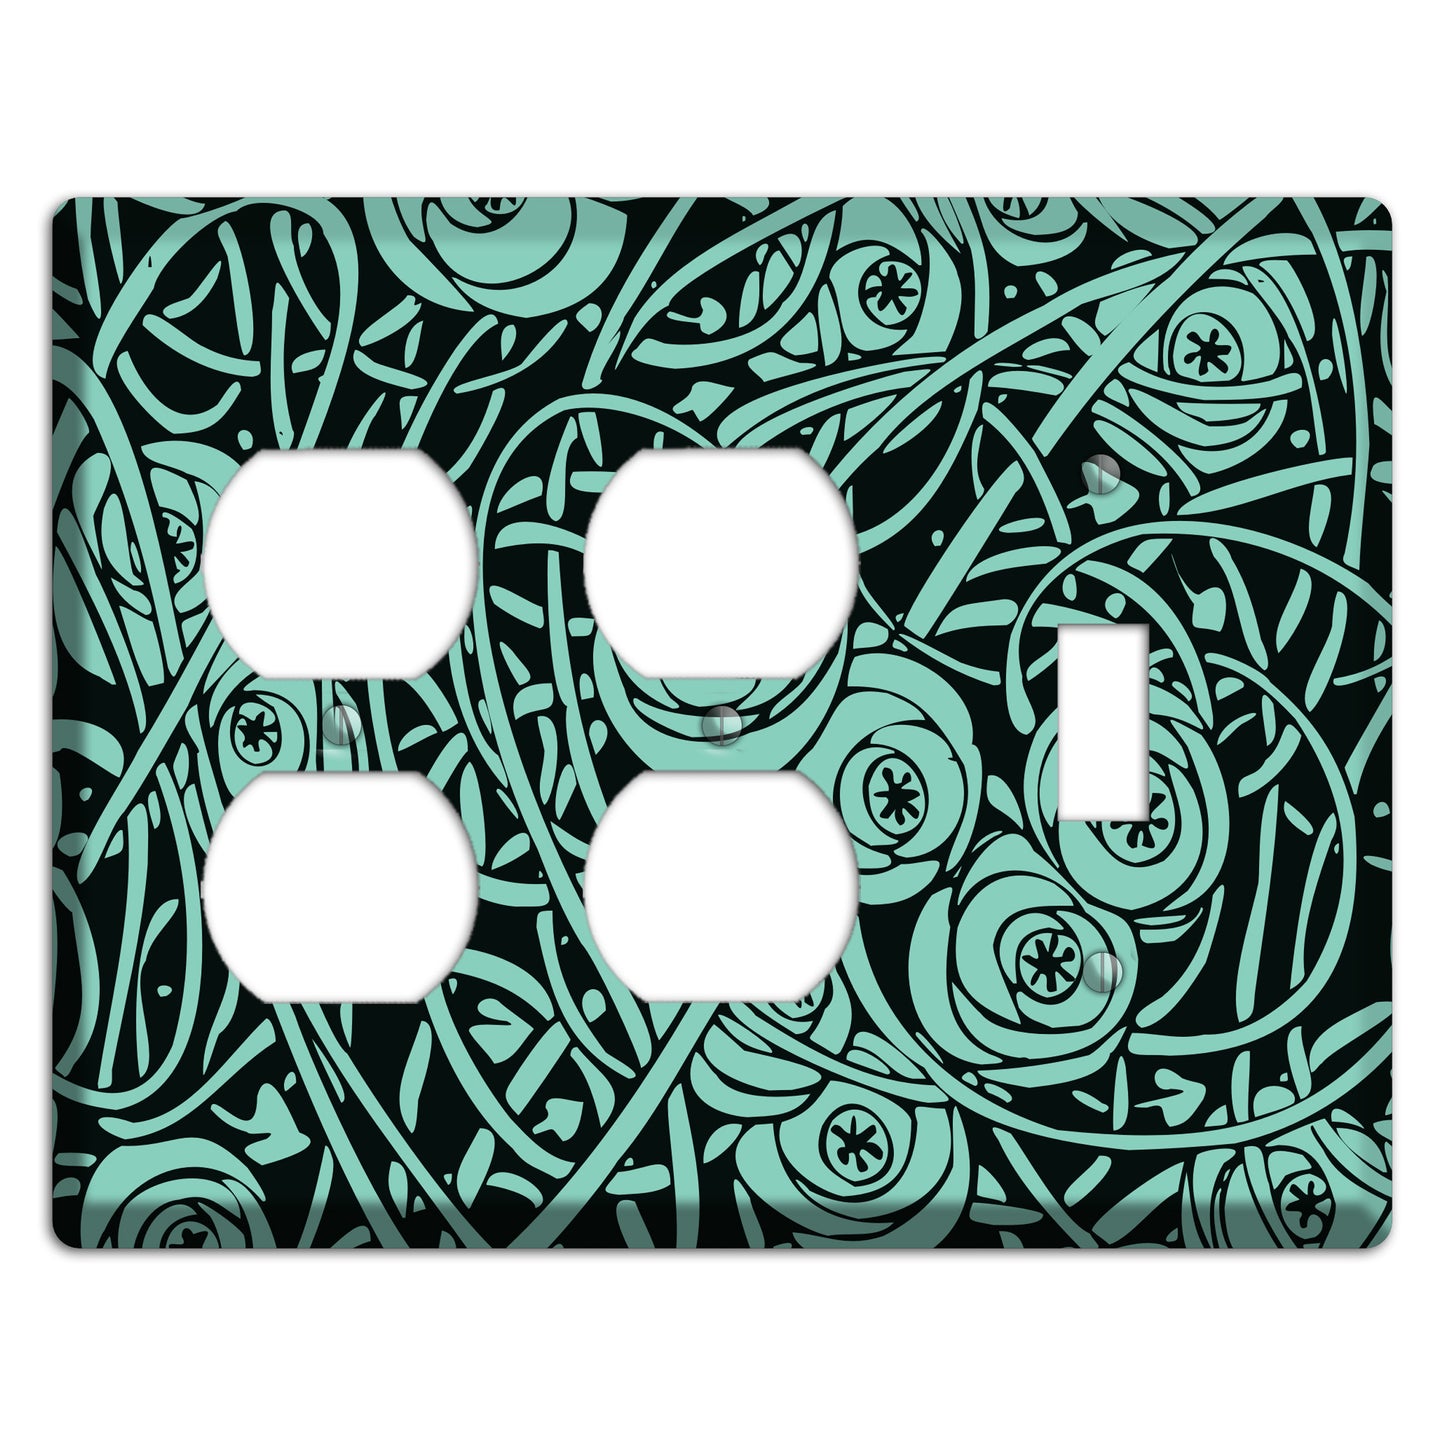 Teal Deco Floral 2 Duplex / Toggle Wallplate